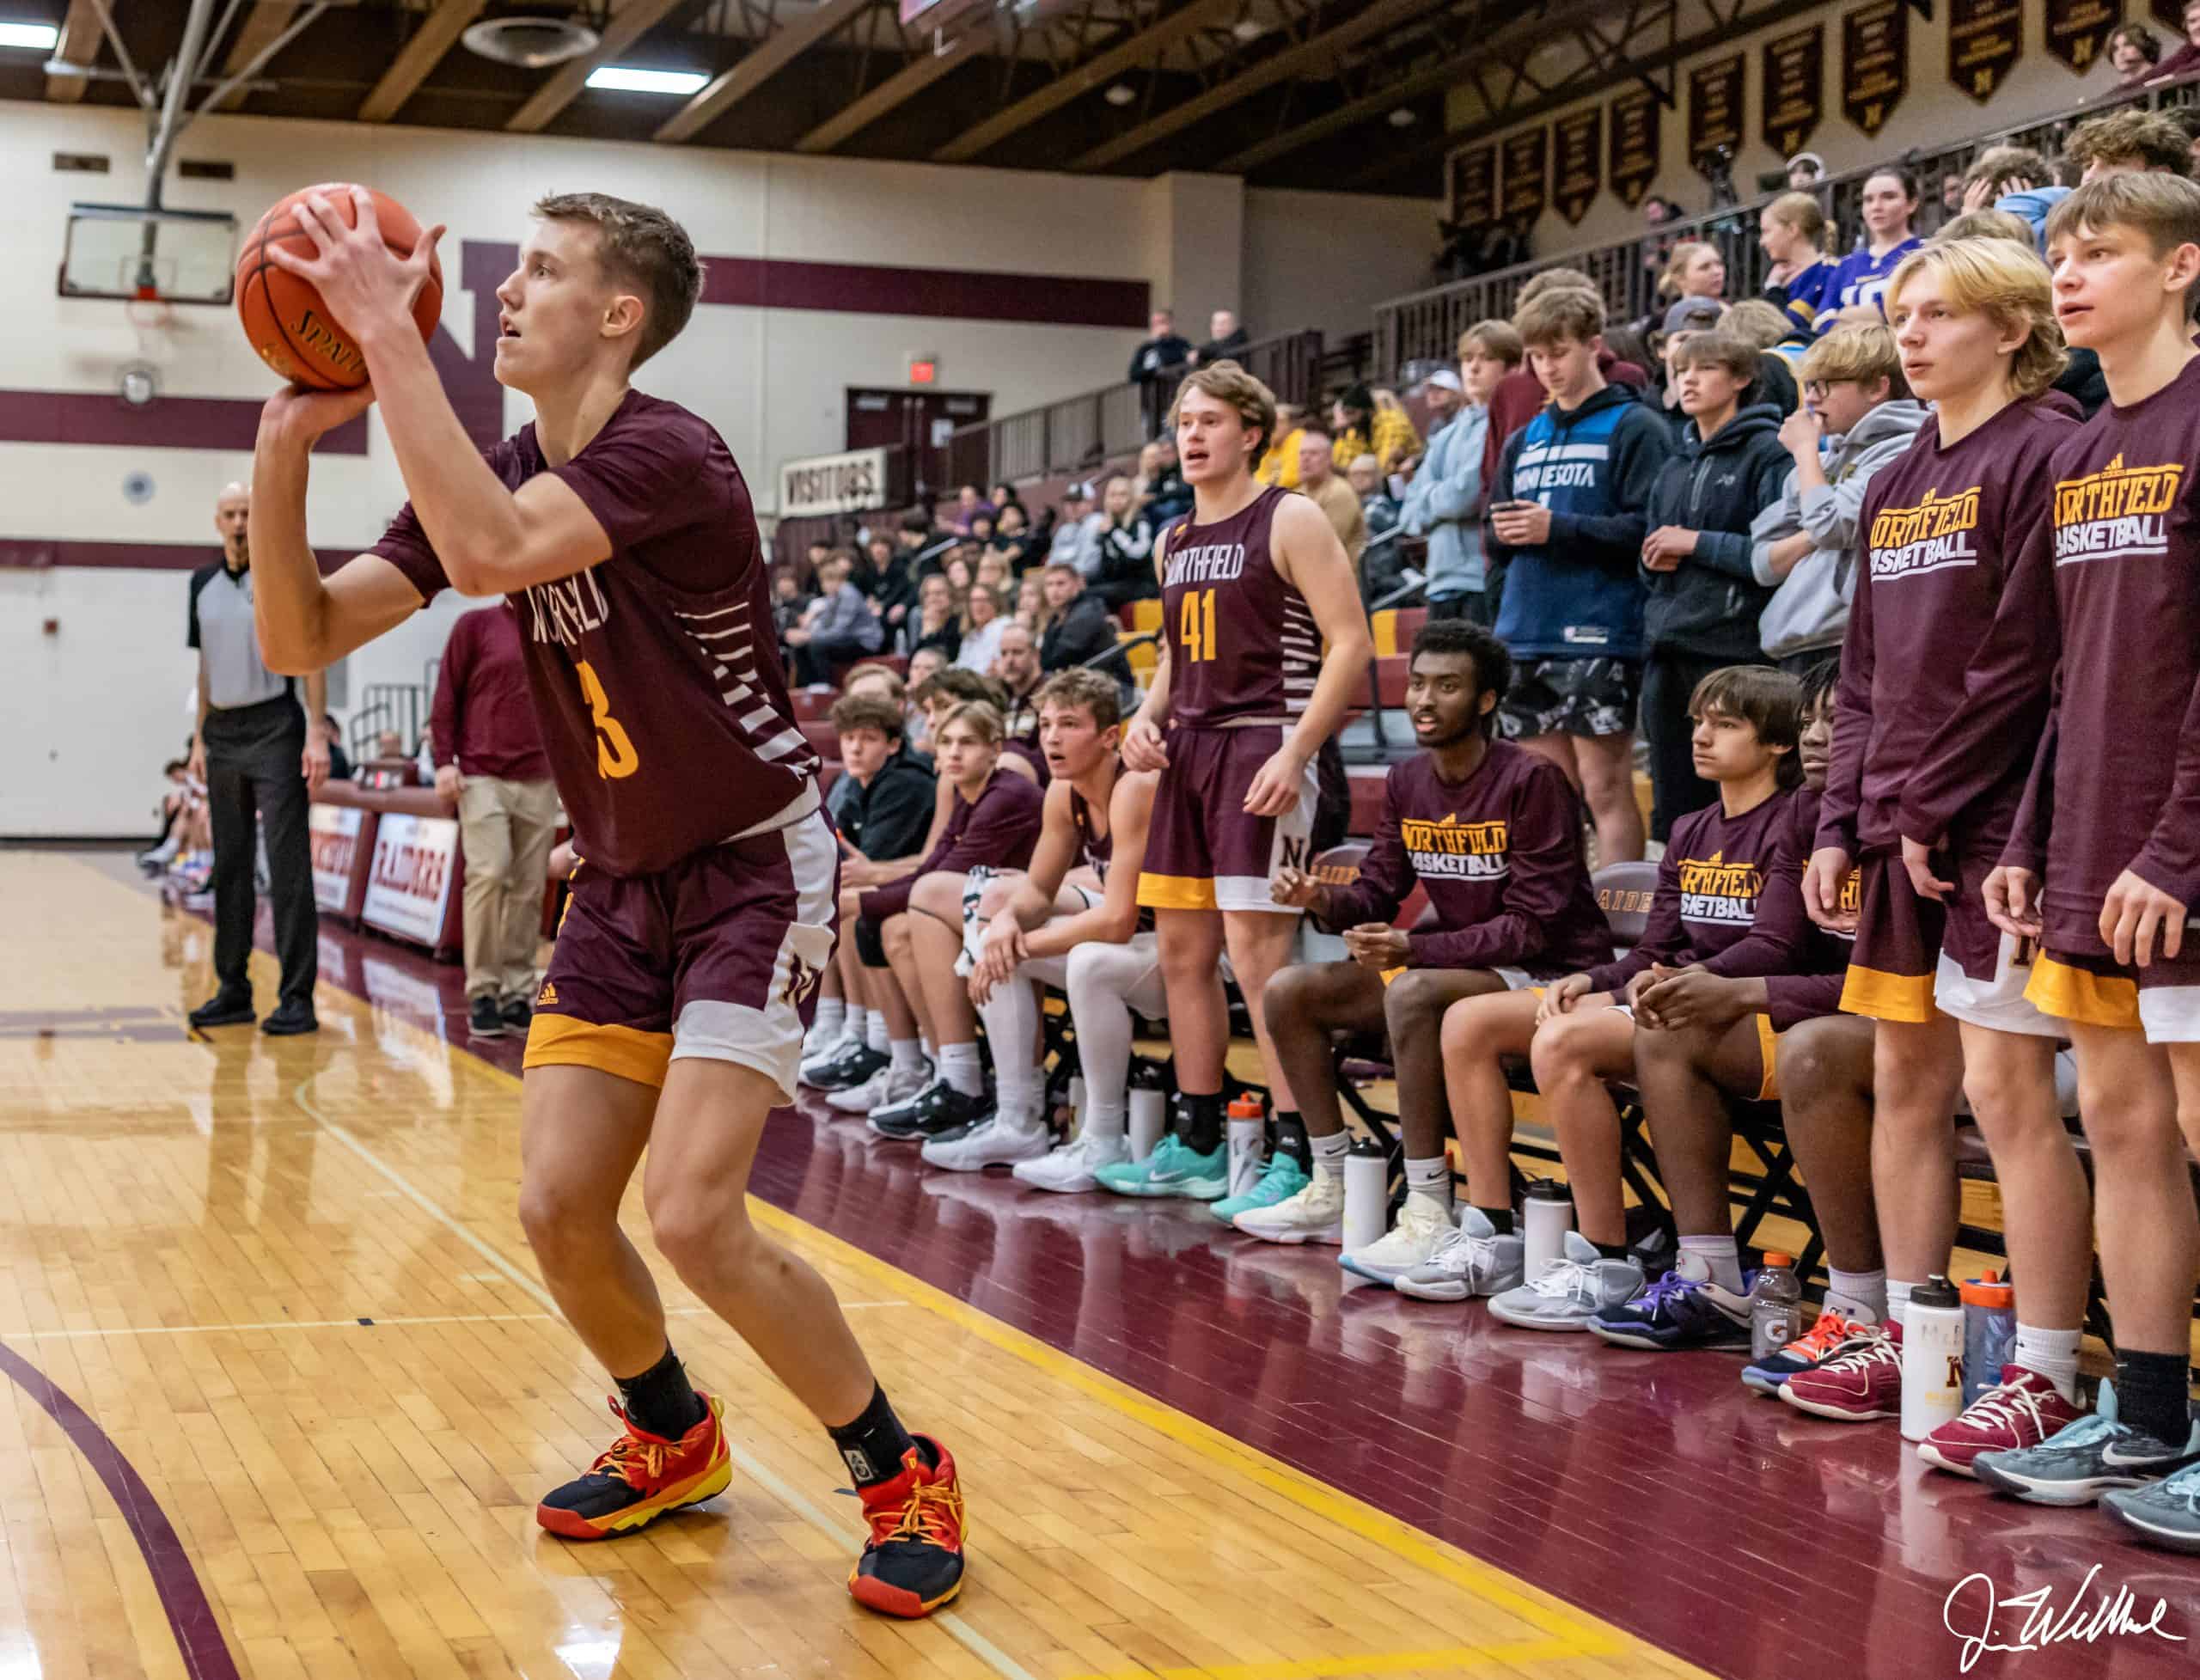 Isaiah Mahal lining up a three in Northfield's game vs Mankato East. photo by Jim Wellbrock